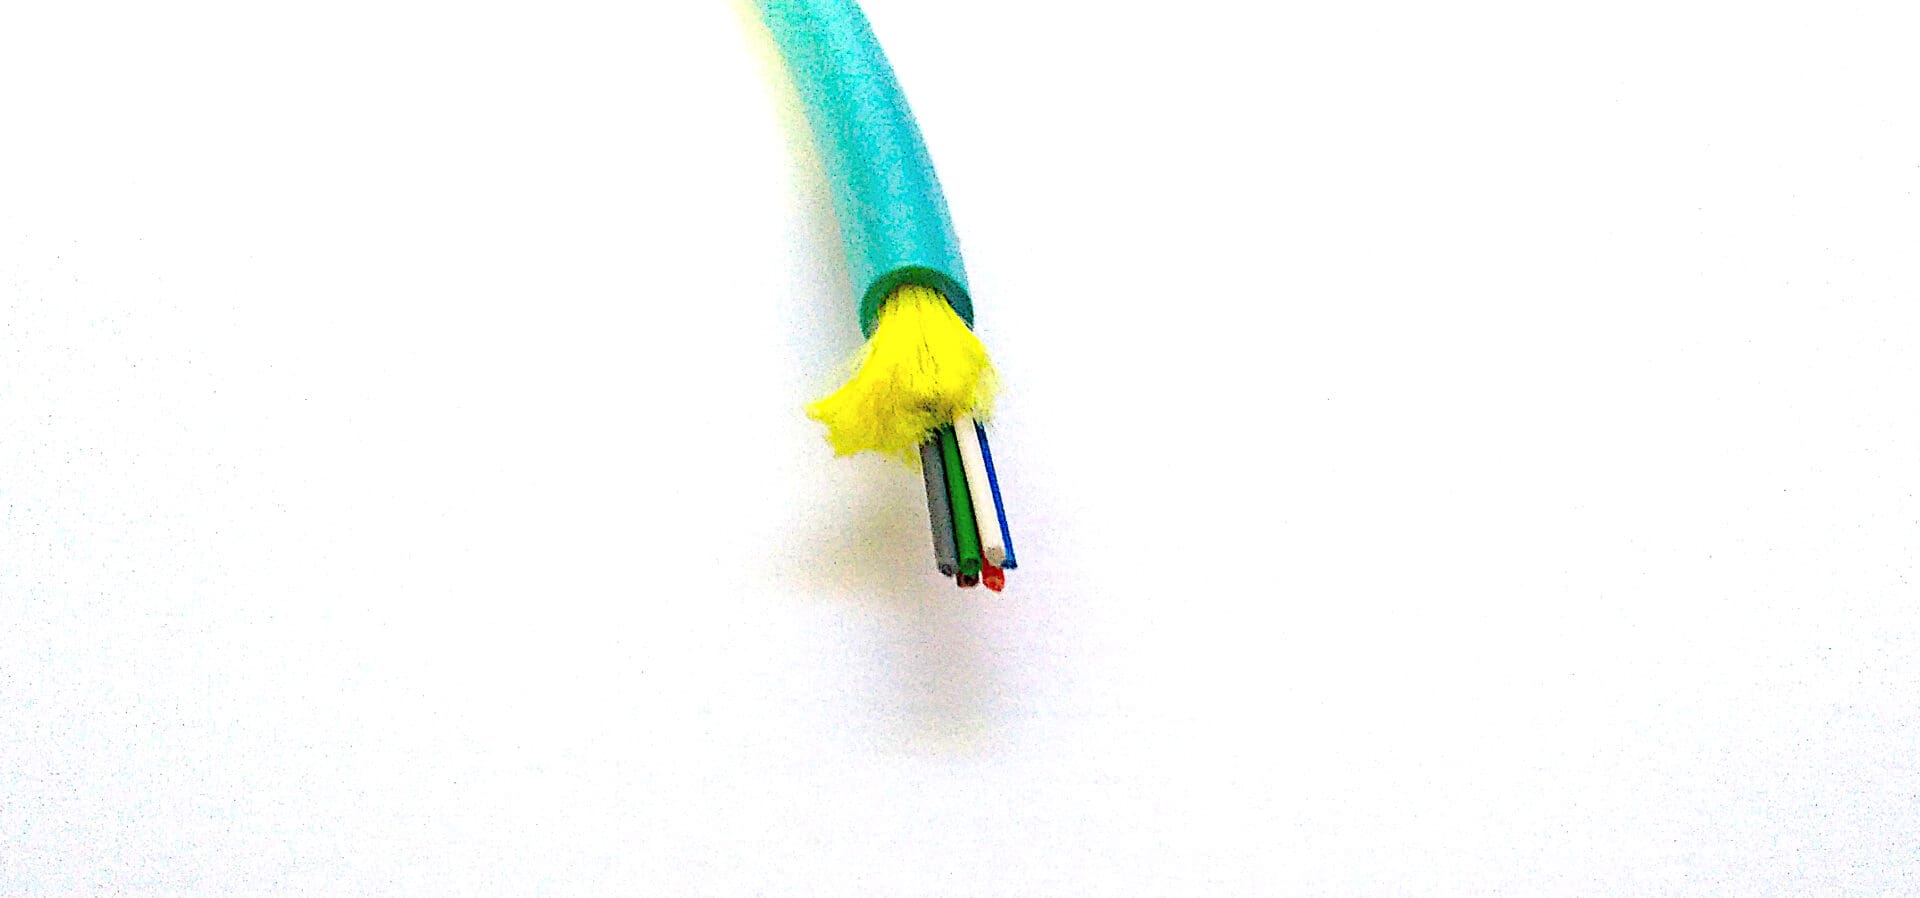 A FiOps240-6F - Aqua Blue cable on a white surface.